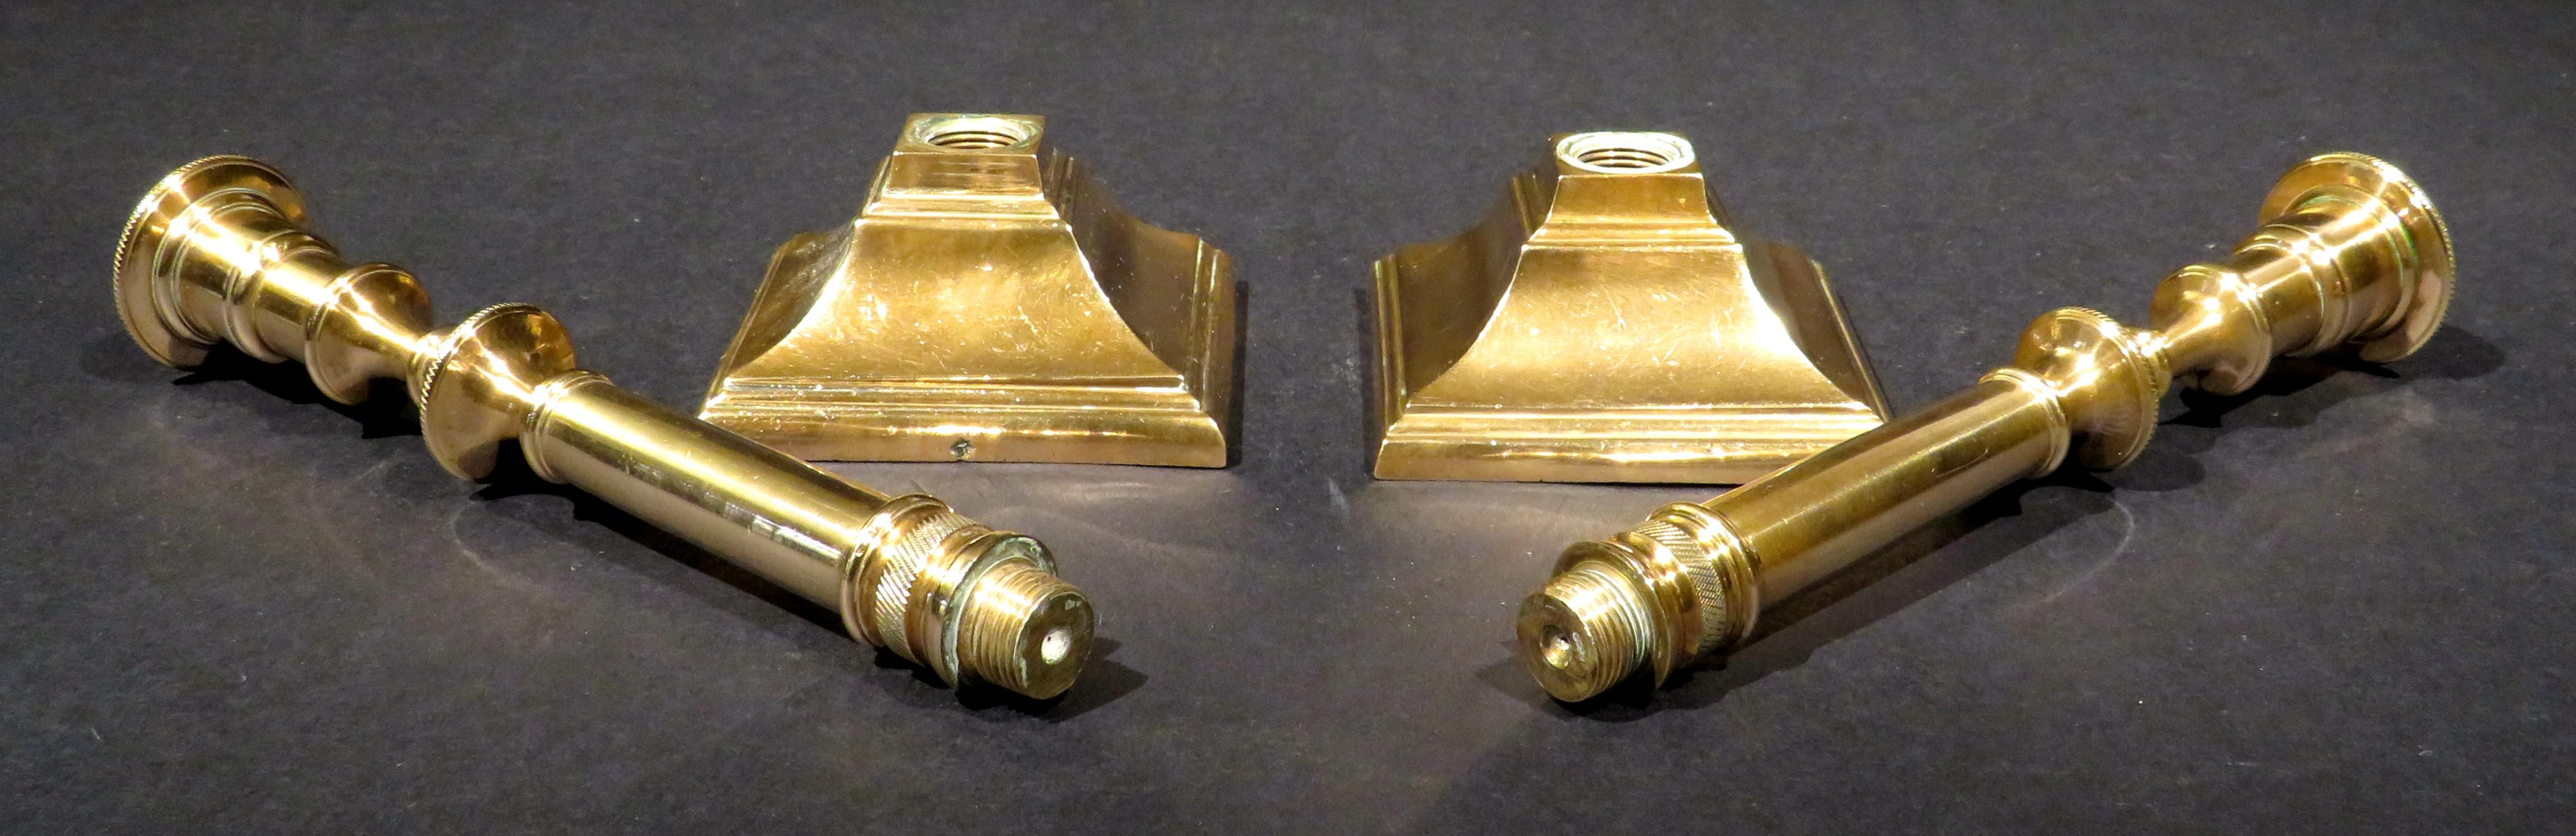 Rare Pair of Georgian Cast Bell Metal Campaign Candlesticks, England circa 1770 In Good Condition For Sale In Ottawa, Ontario